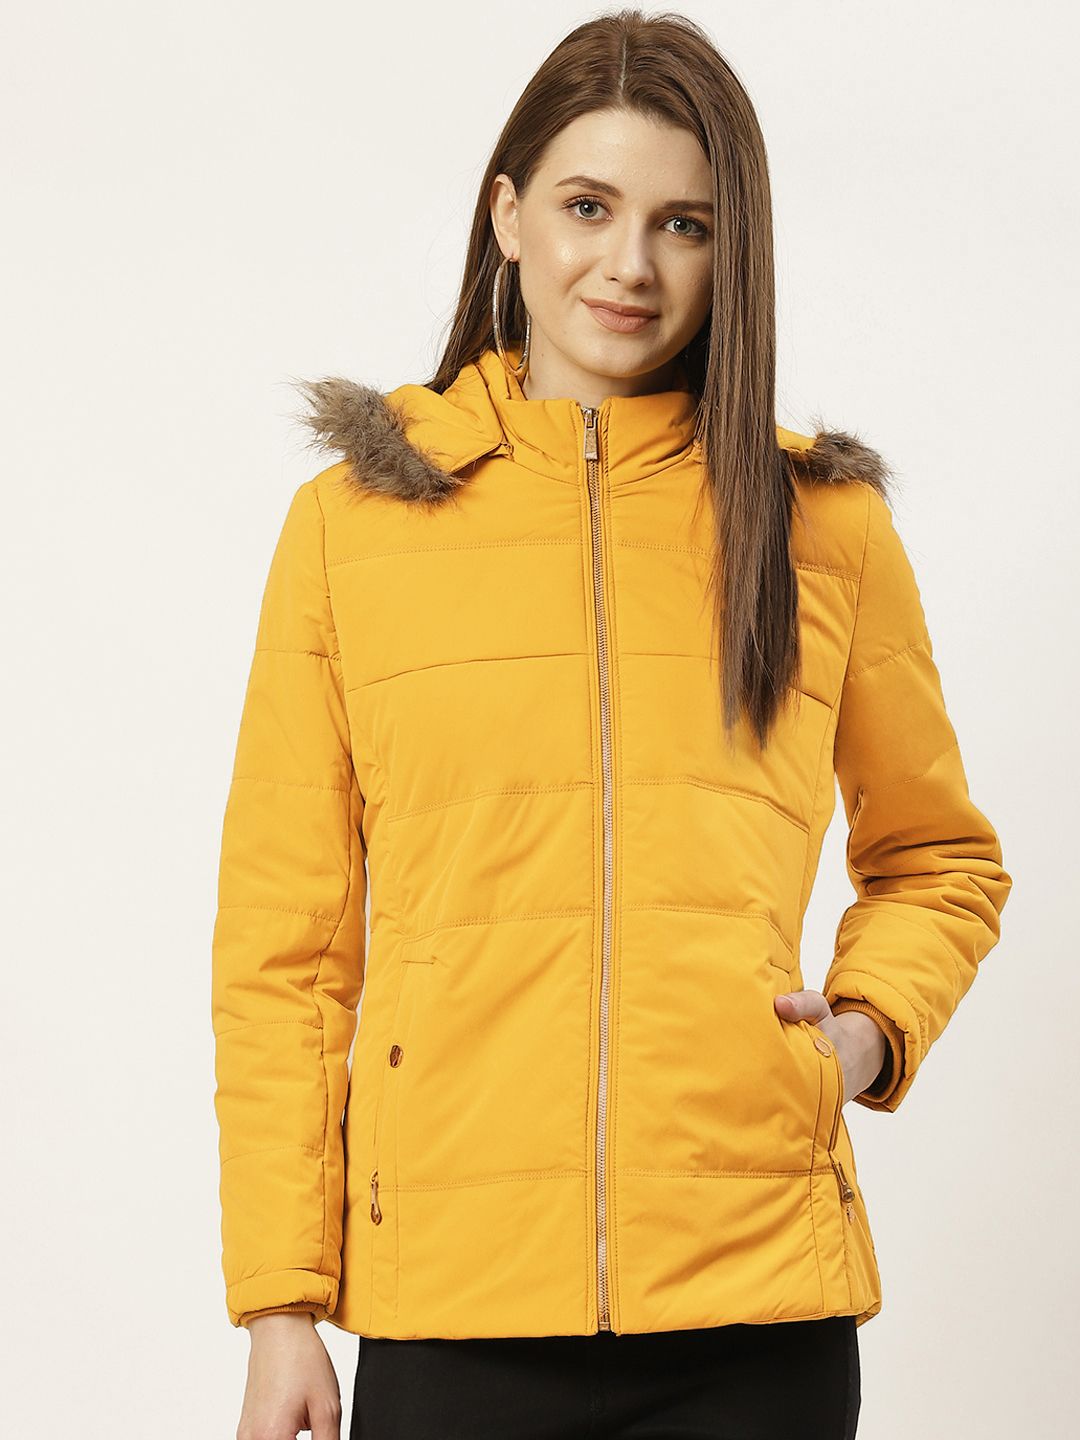 Monte Carlo Women Mustard Yellow Parka Jacket with Detachable Hood Price in India